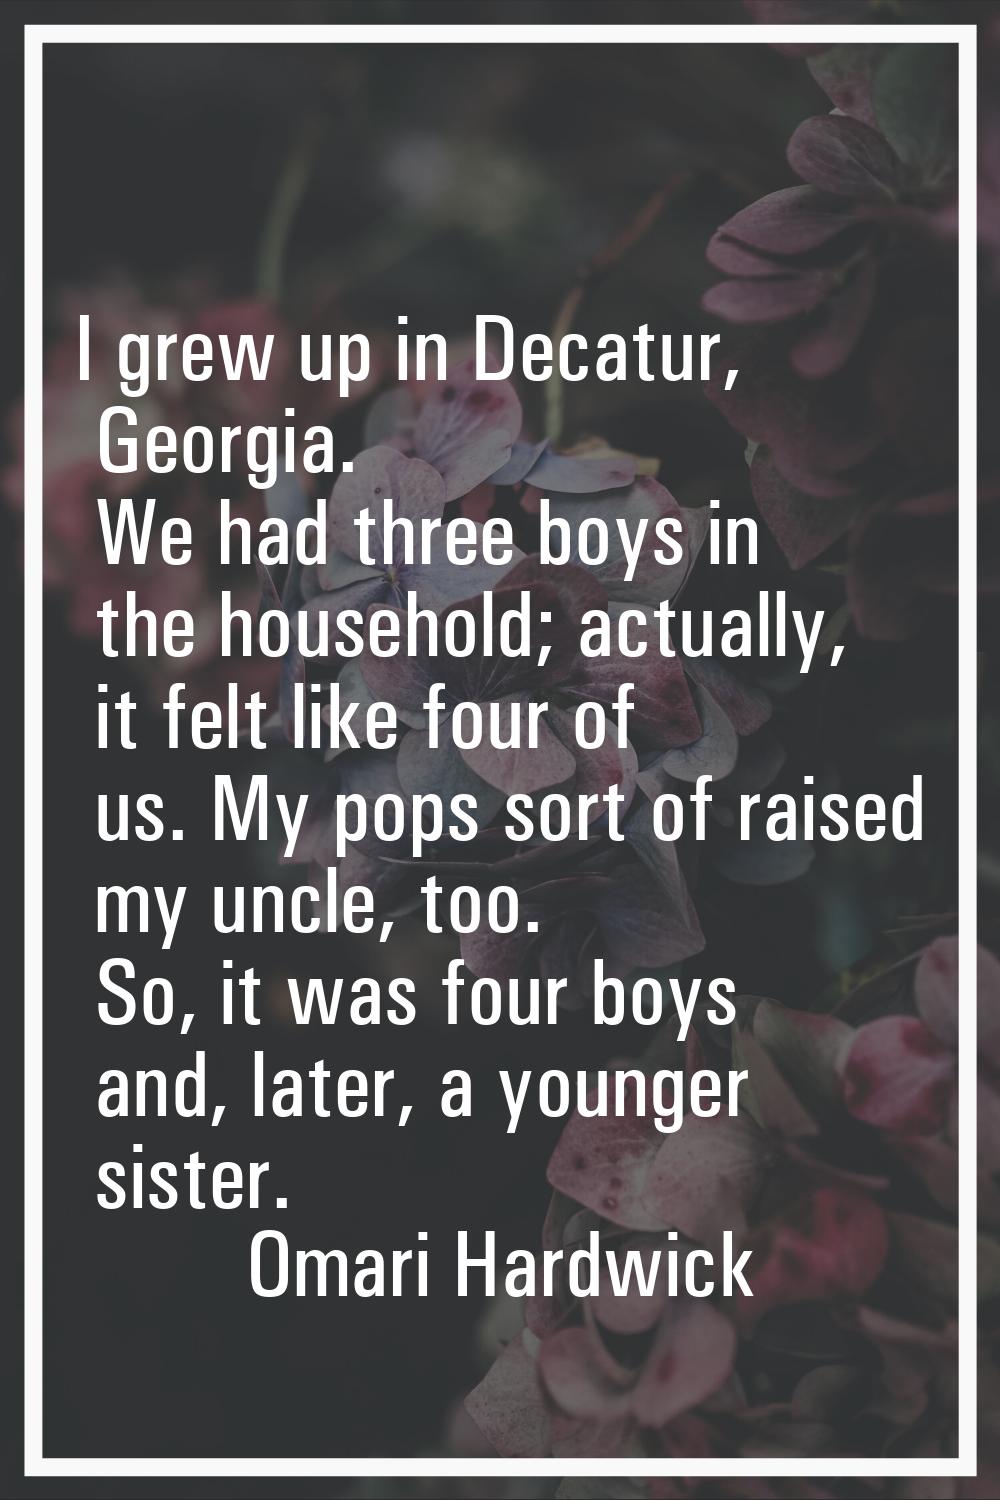 I grew up in Decatur, Georgia. We had three boys in the household; actually, it felt like four of u